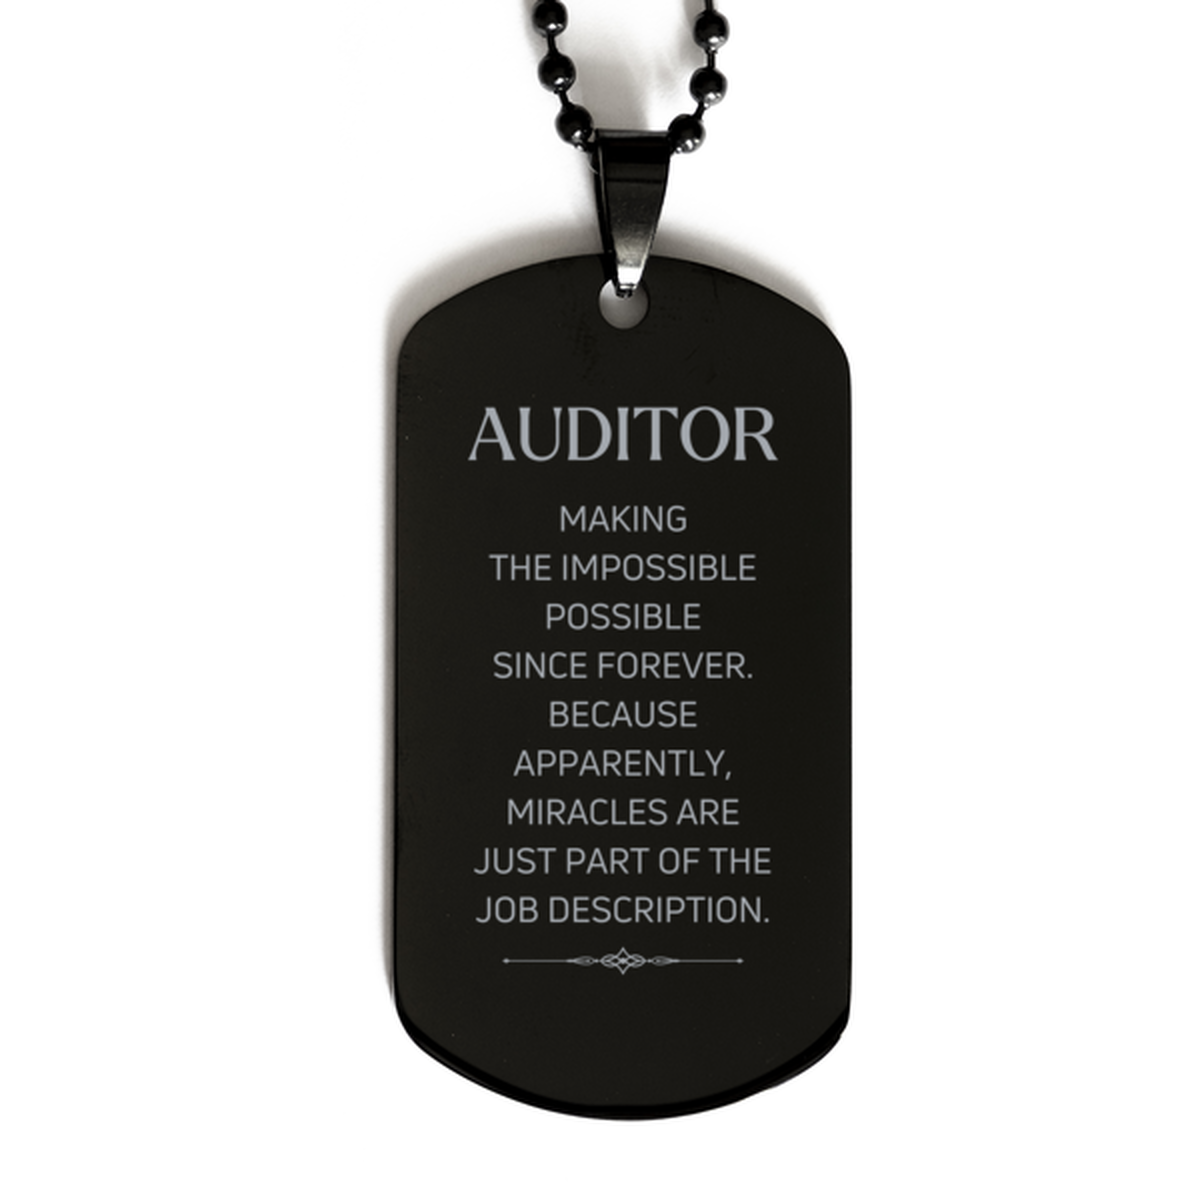 Funny Auditor Gifts, Miracles are just part of the job description, Inspirational Birthday Black Dog Tag For Auditor, Men, Women, Coworkers, Friends, Boss